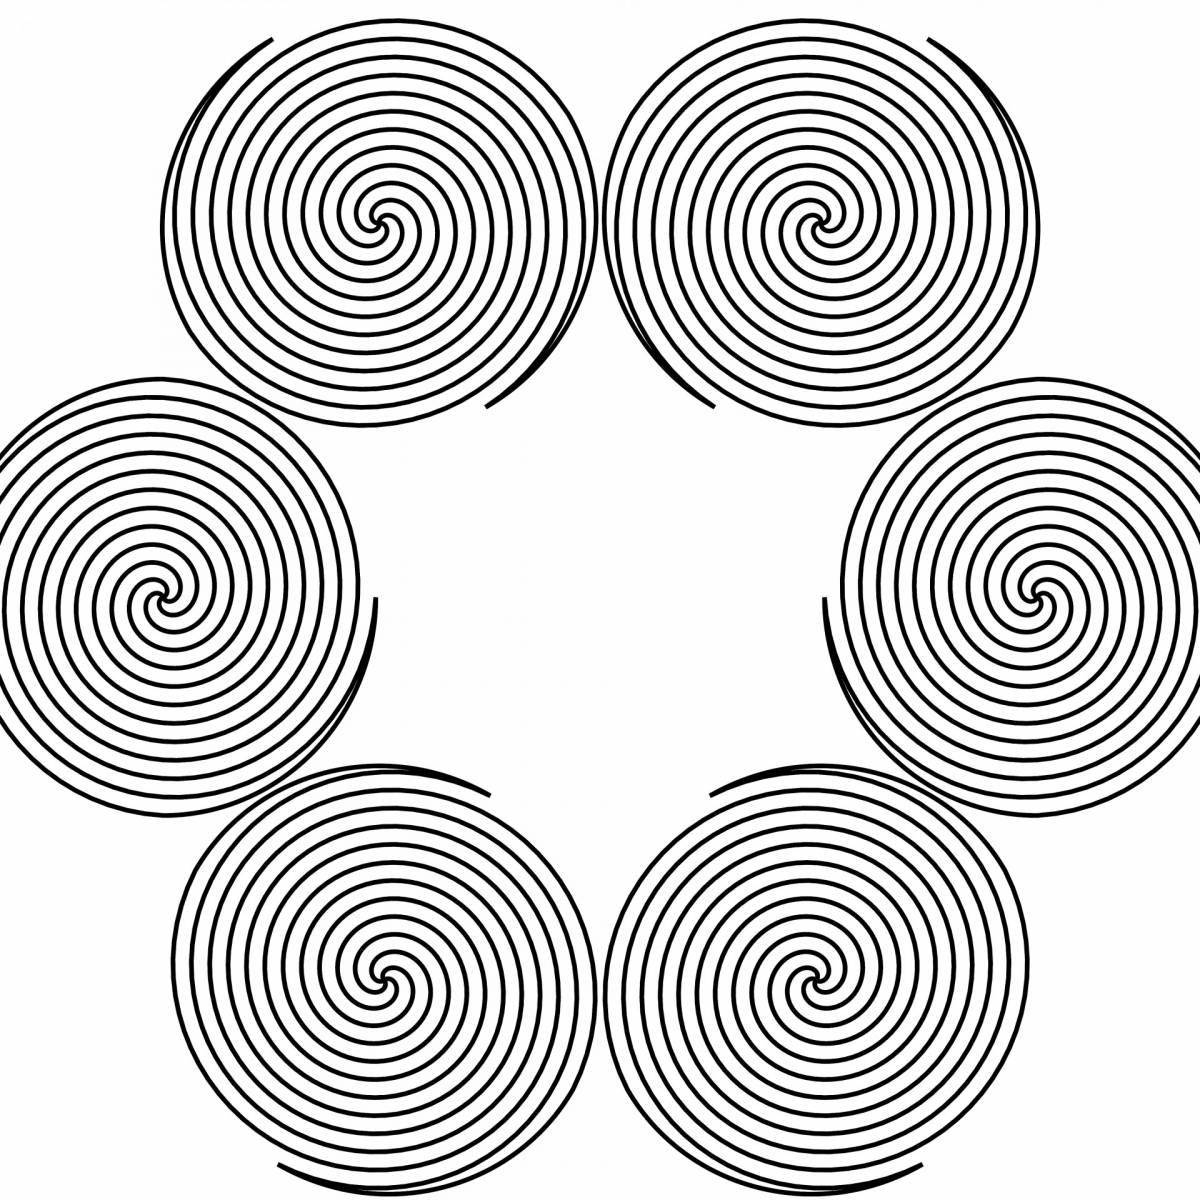 Charming coloring spiral unpainted